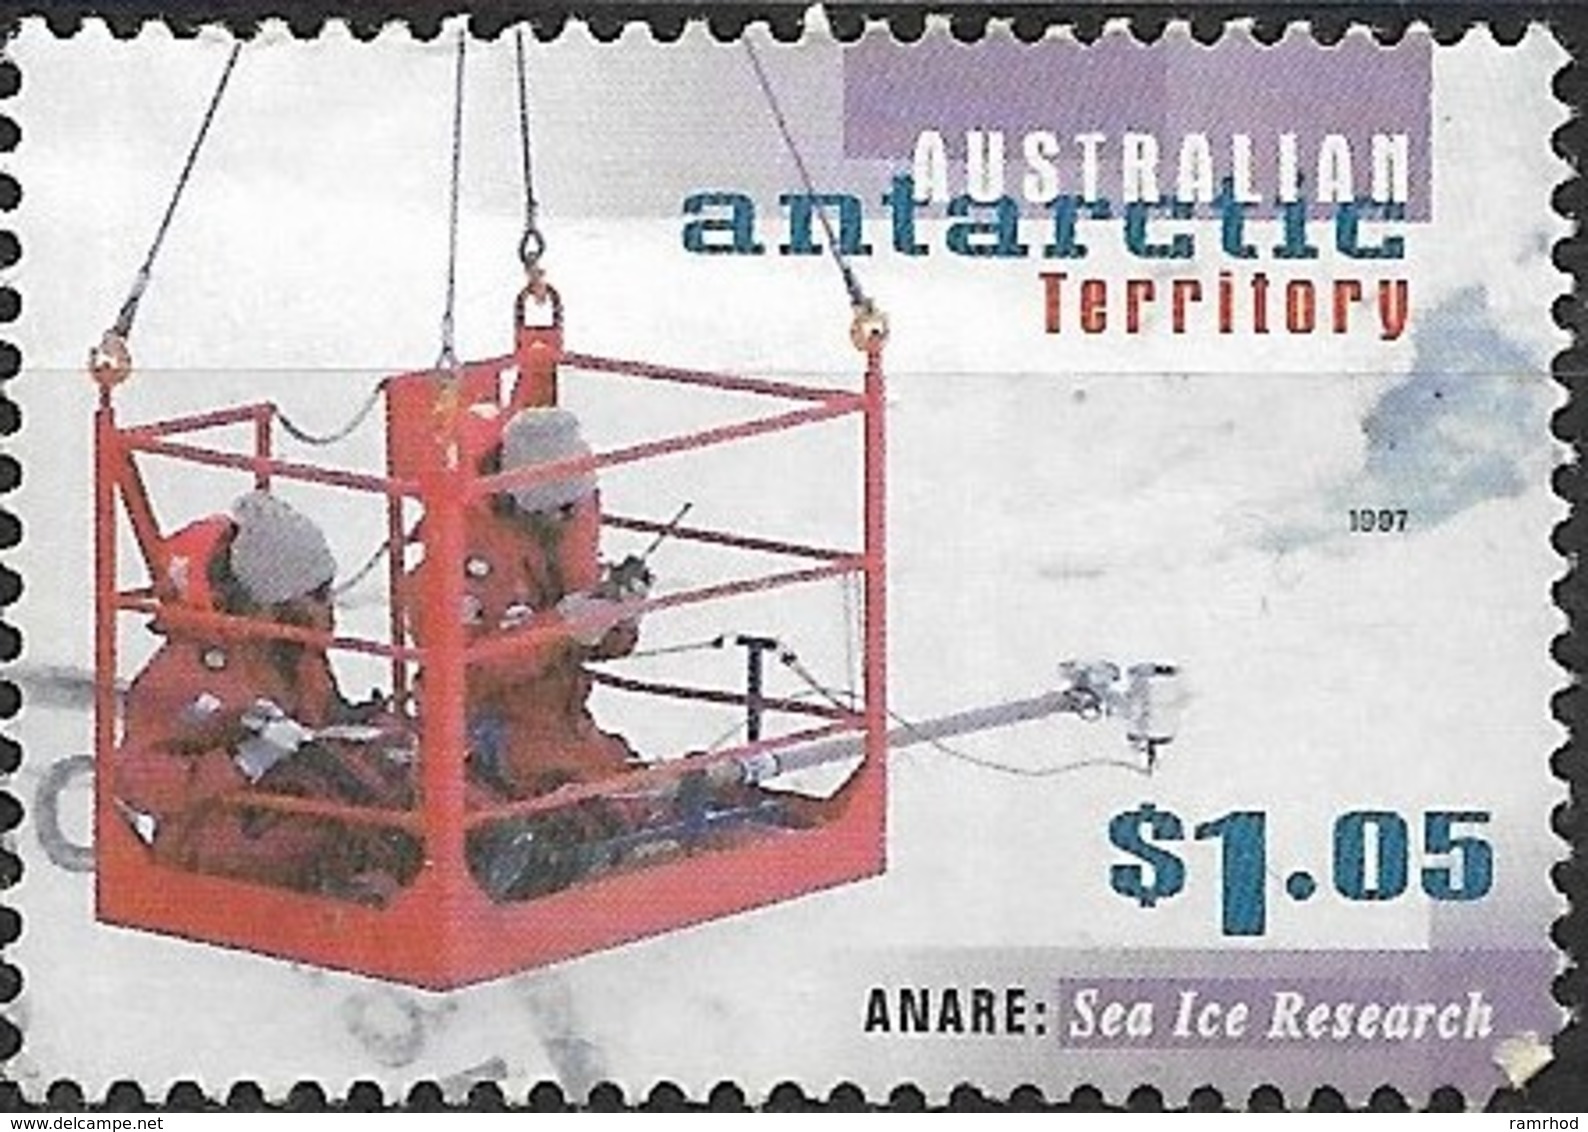 AUSTRALIAN ANTARCTIC TERRITORY 1997 50th Anniv National Antarctic Research Expeditions - $1.05 - Scientists In Cage FU - Oblitérés